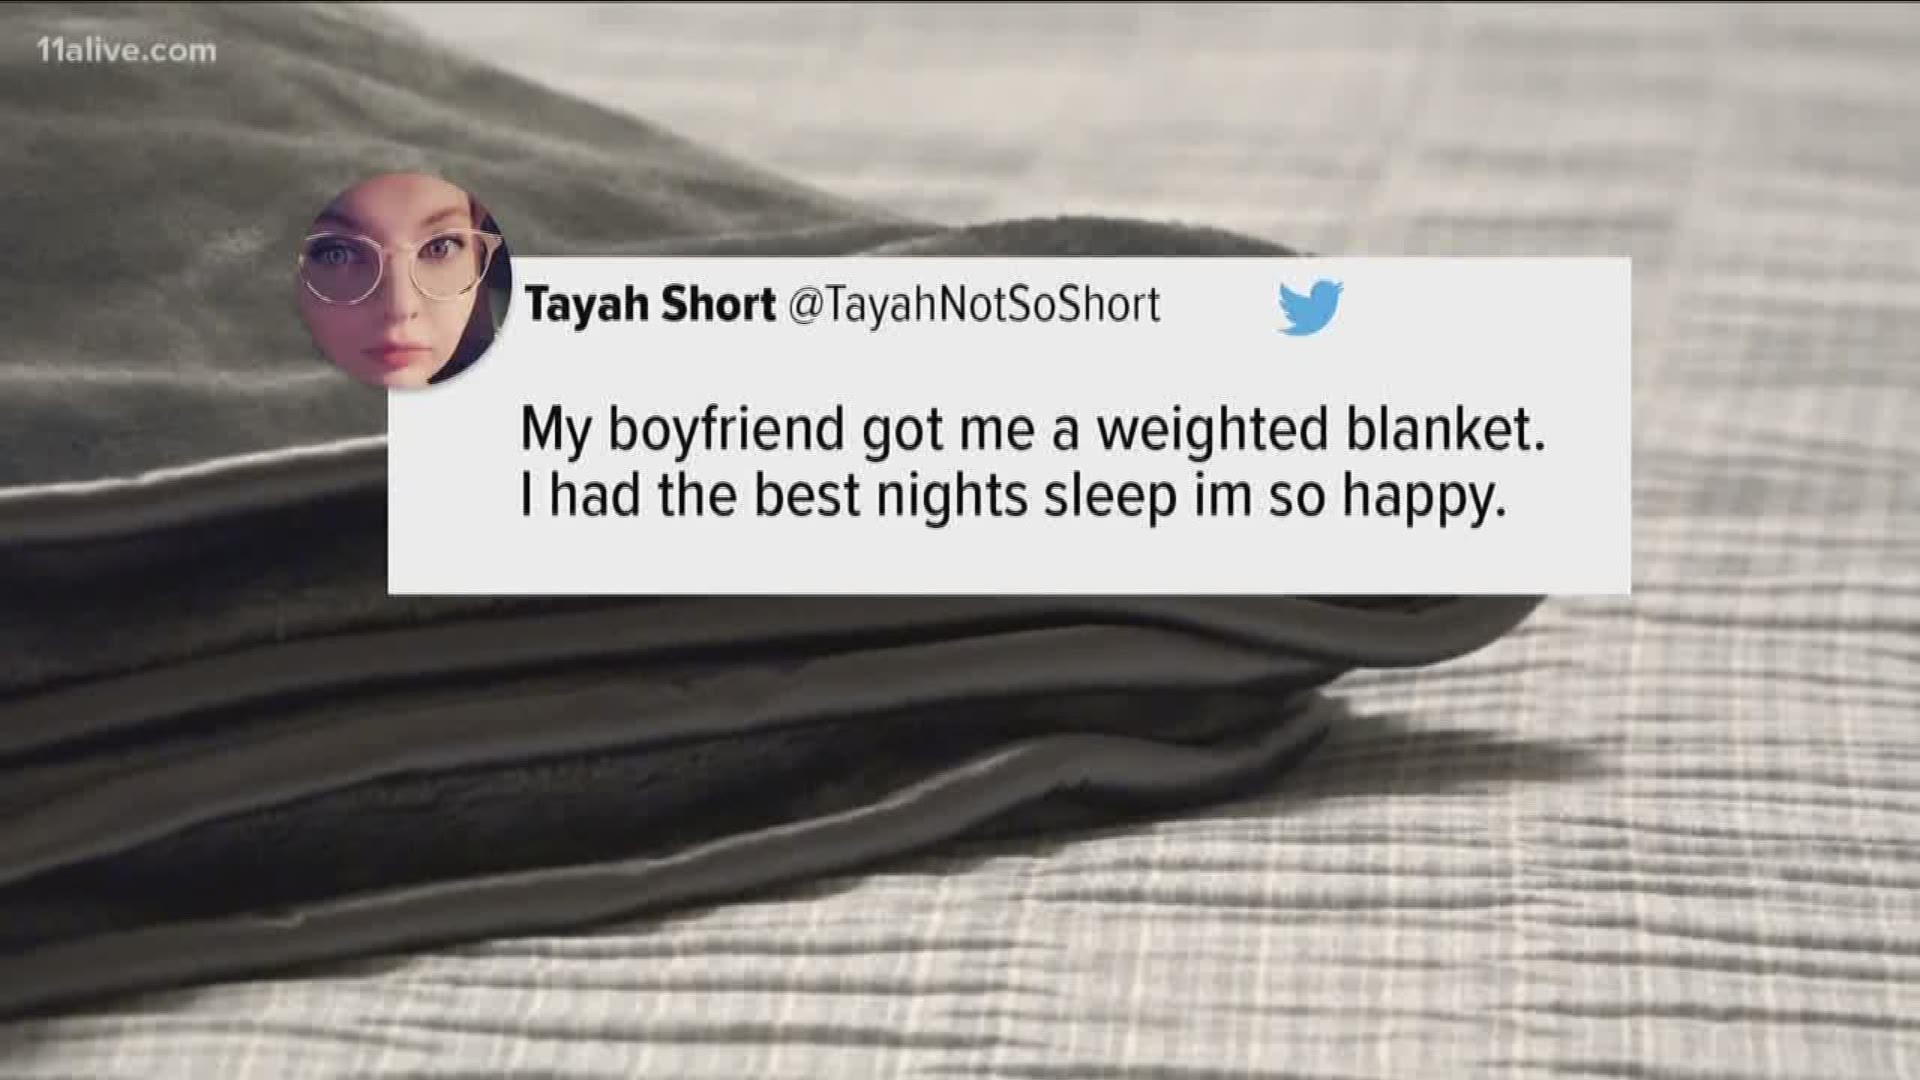 A weighted blanket could be the key to a beautiful night of sleep...or maybe not.